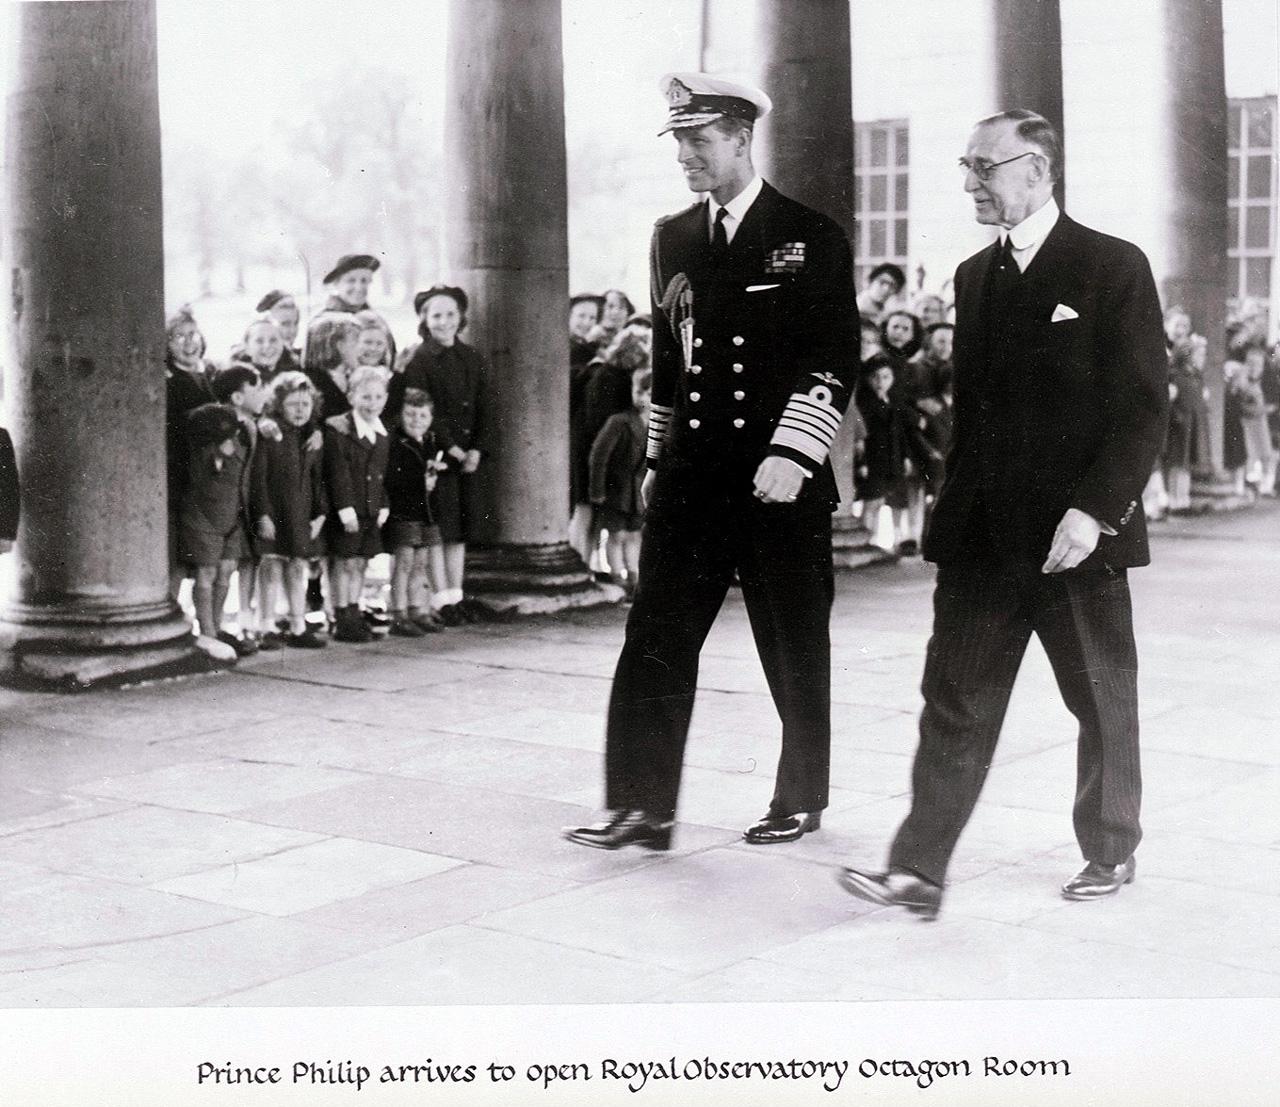 The Duke of Edinburgh arrives to open the Octagon Room at the Royal Observatory Greenwich, 8 May 1953